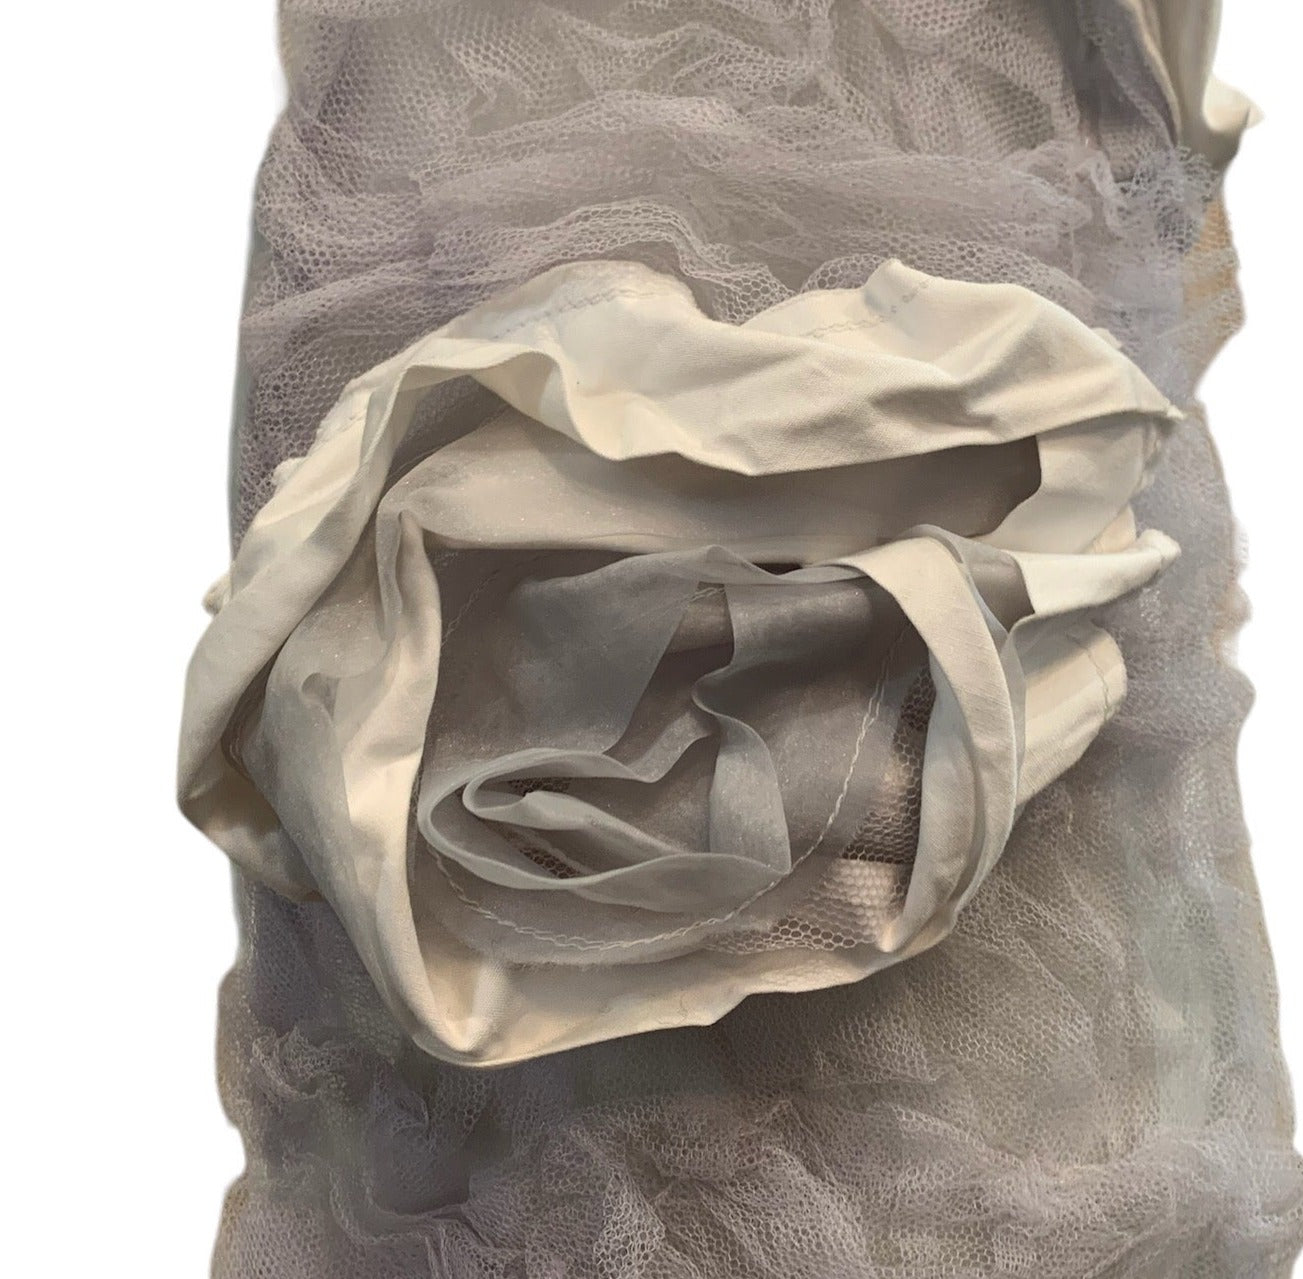    Comme Des Garcons Tulle Scarf with Flowers DETAIL 3 of 5